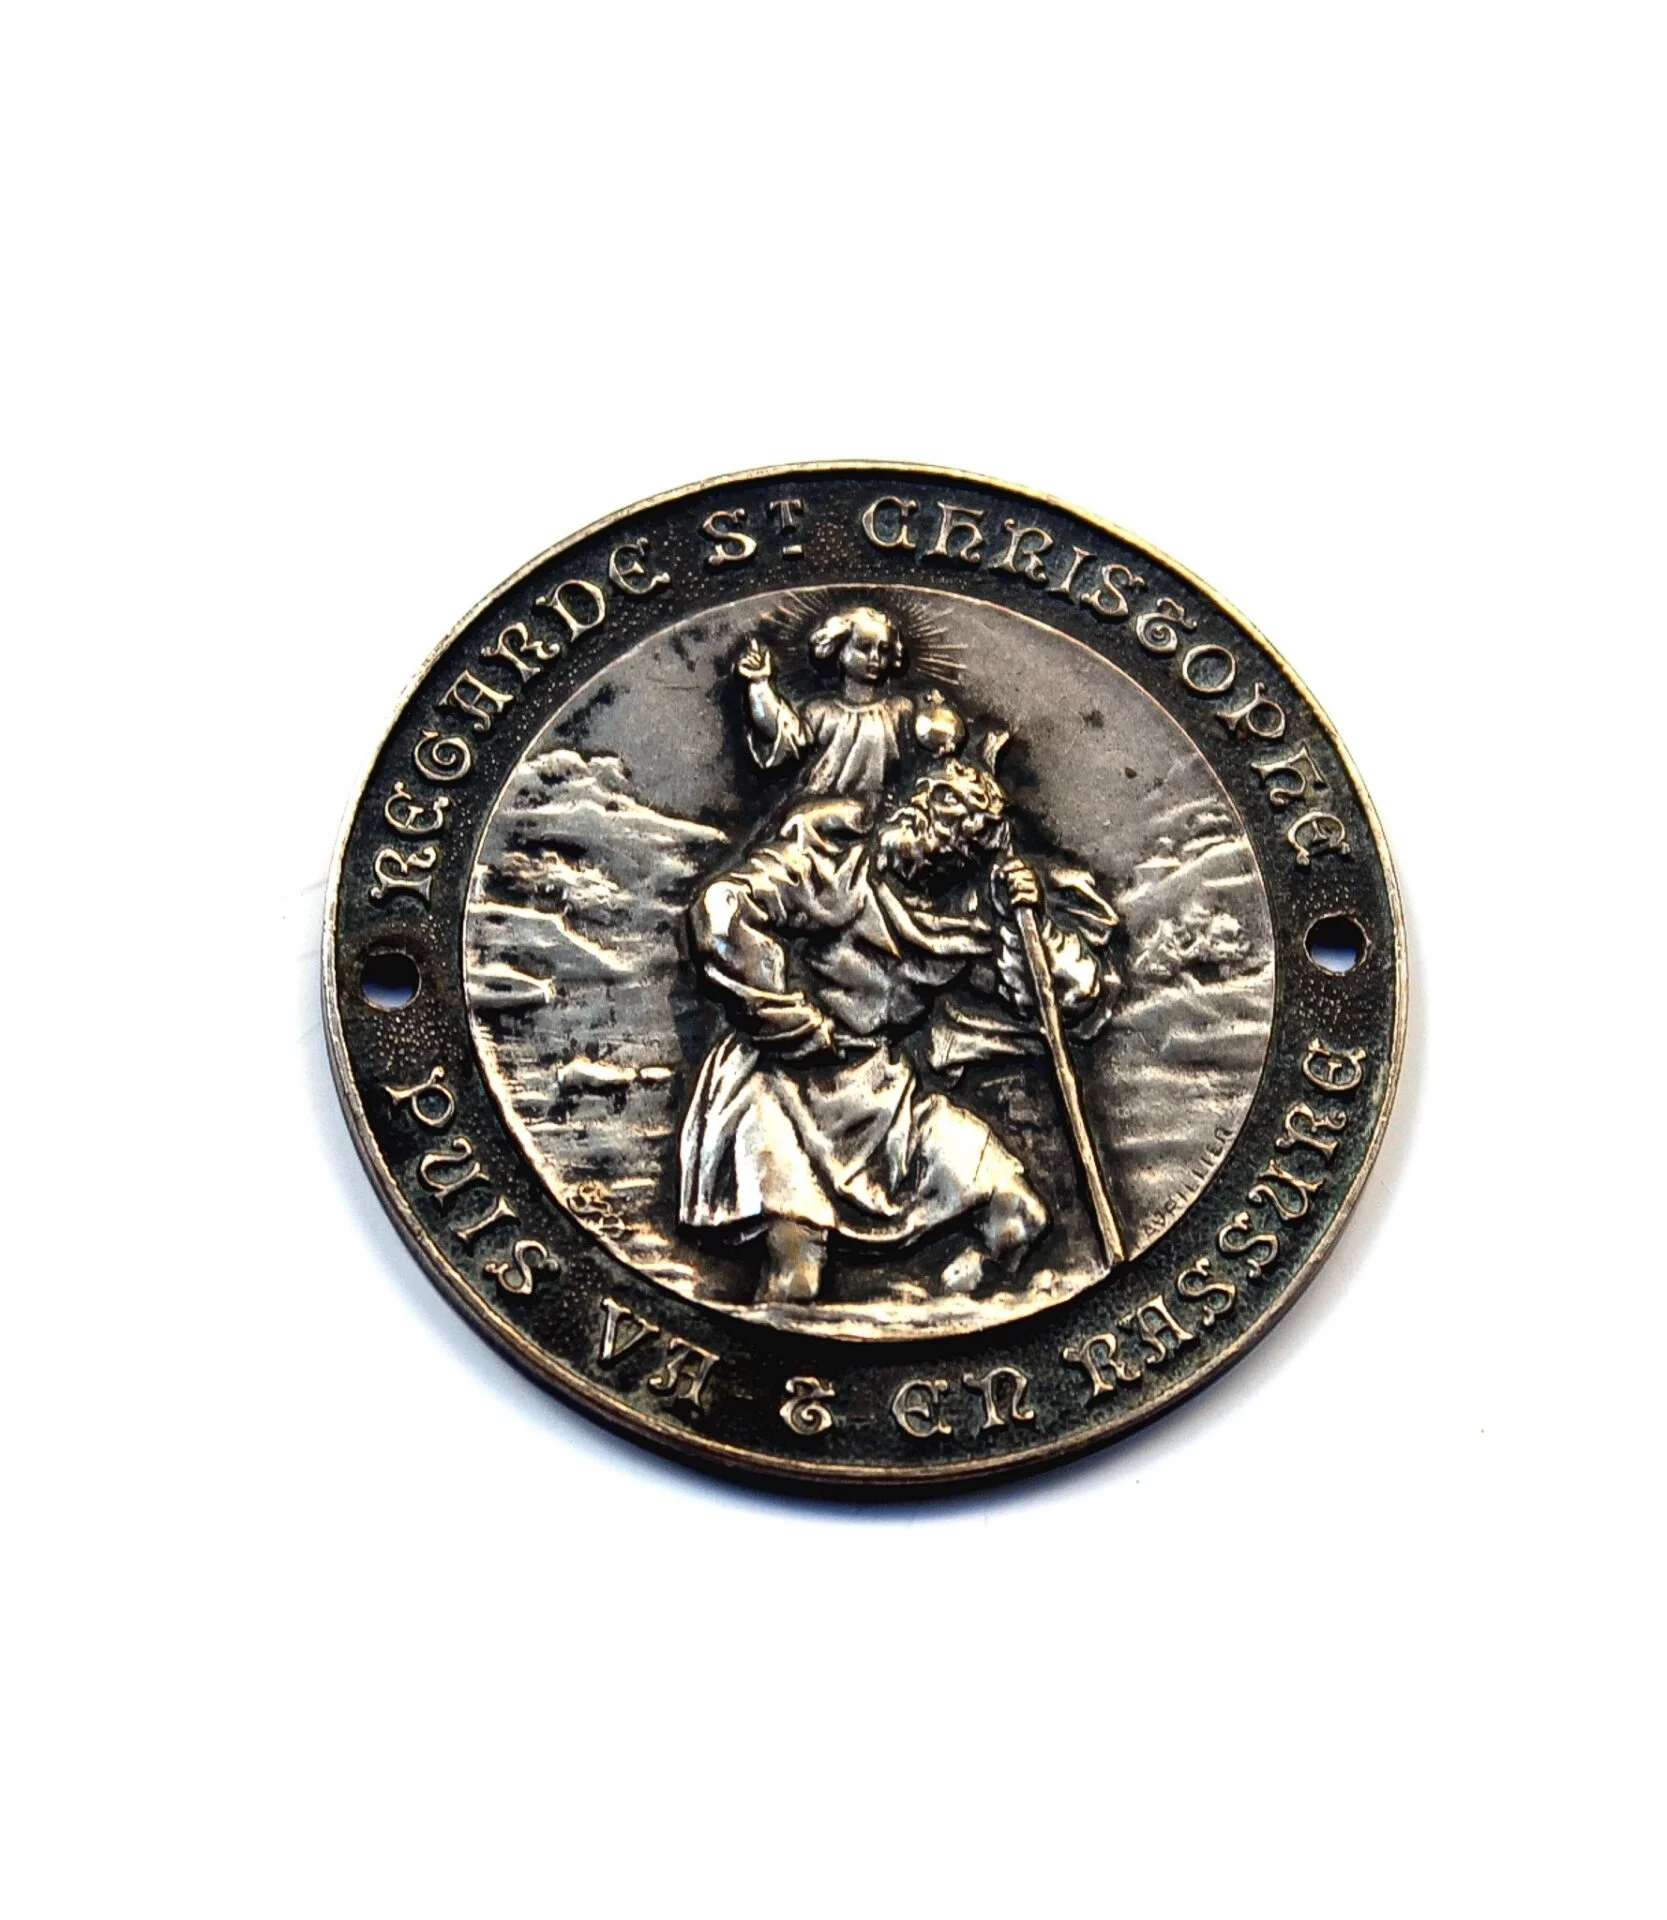 Saint Christopher dashboard badge by Lavrillier